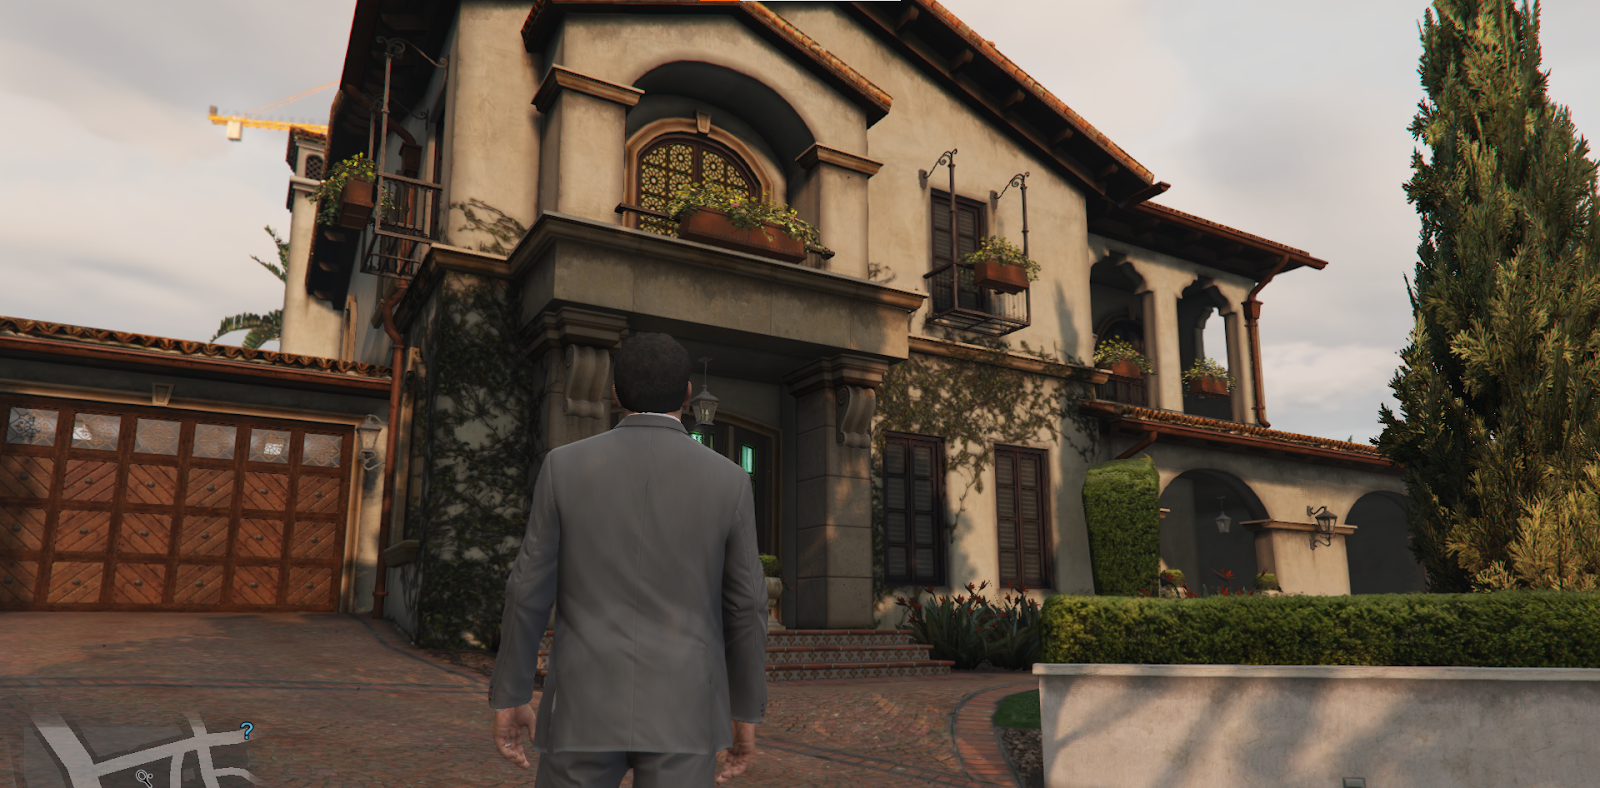 Go back to Michael's house to get a Smart Outfit in GTA V.